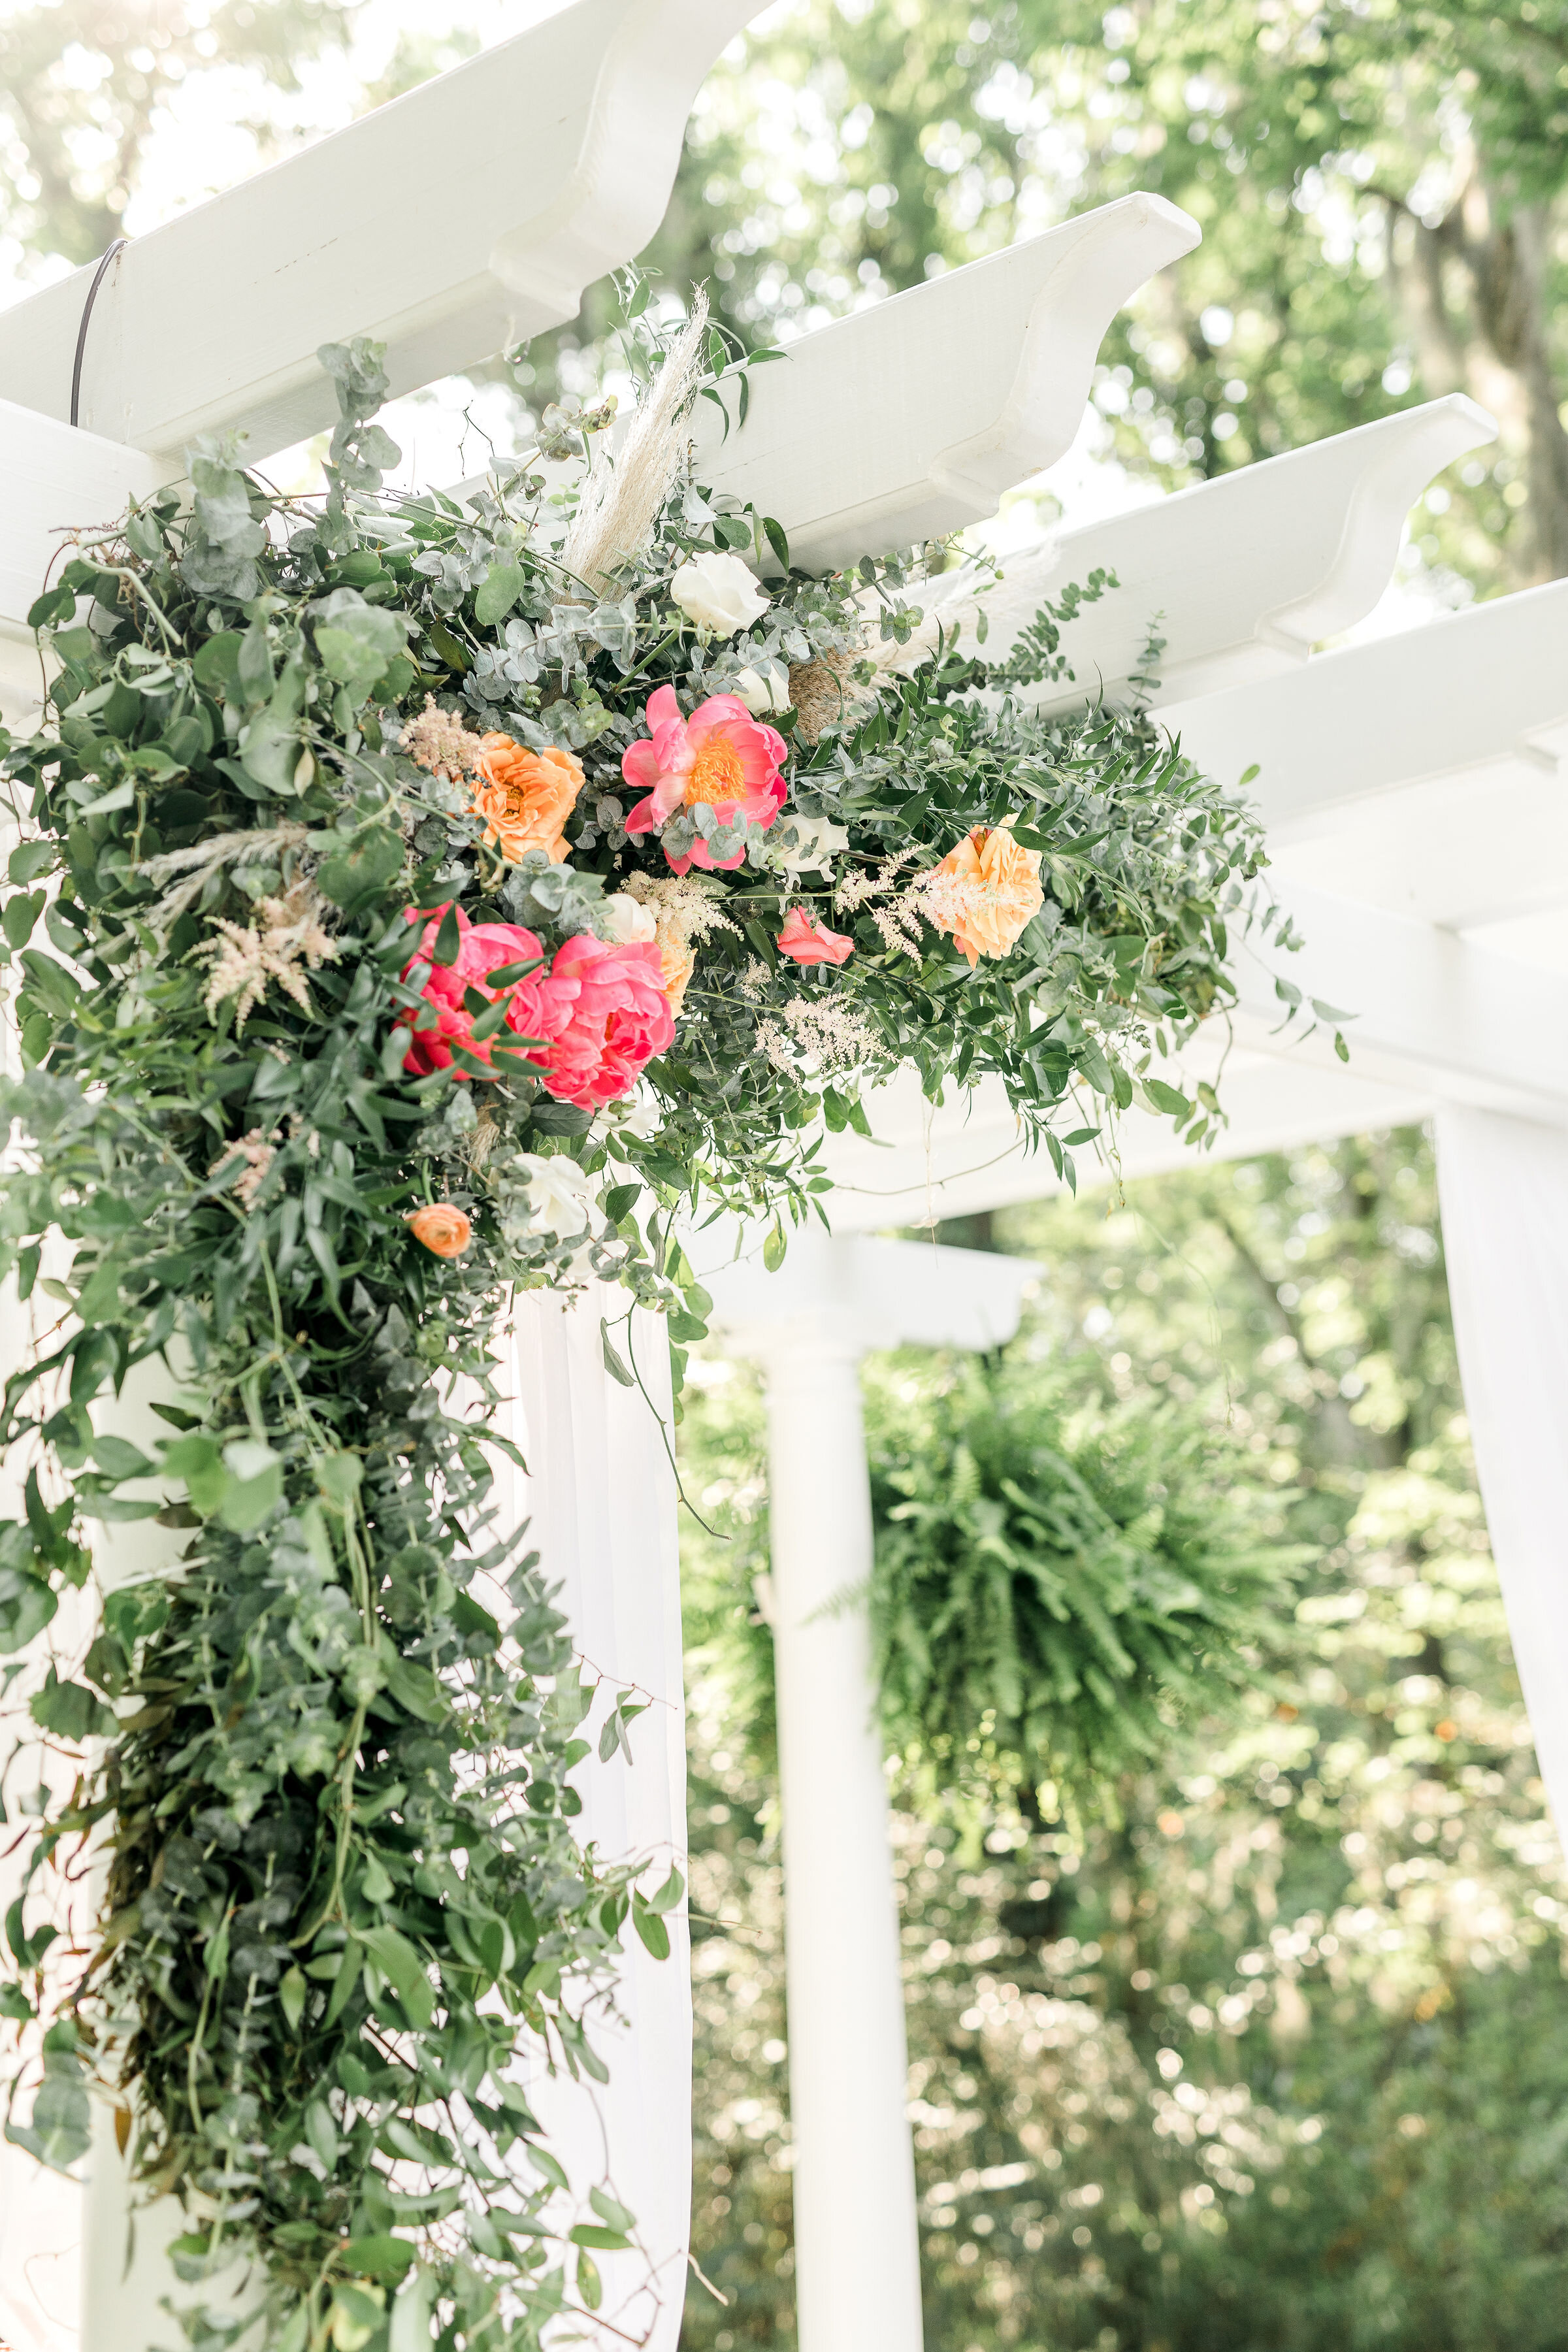 hanging-flower-design-pink-and-green-flowers-ceremony-backdrop-flowers-greenery-southern-wedding.jpg